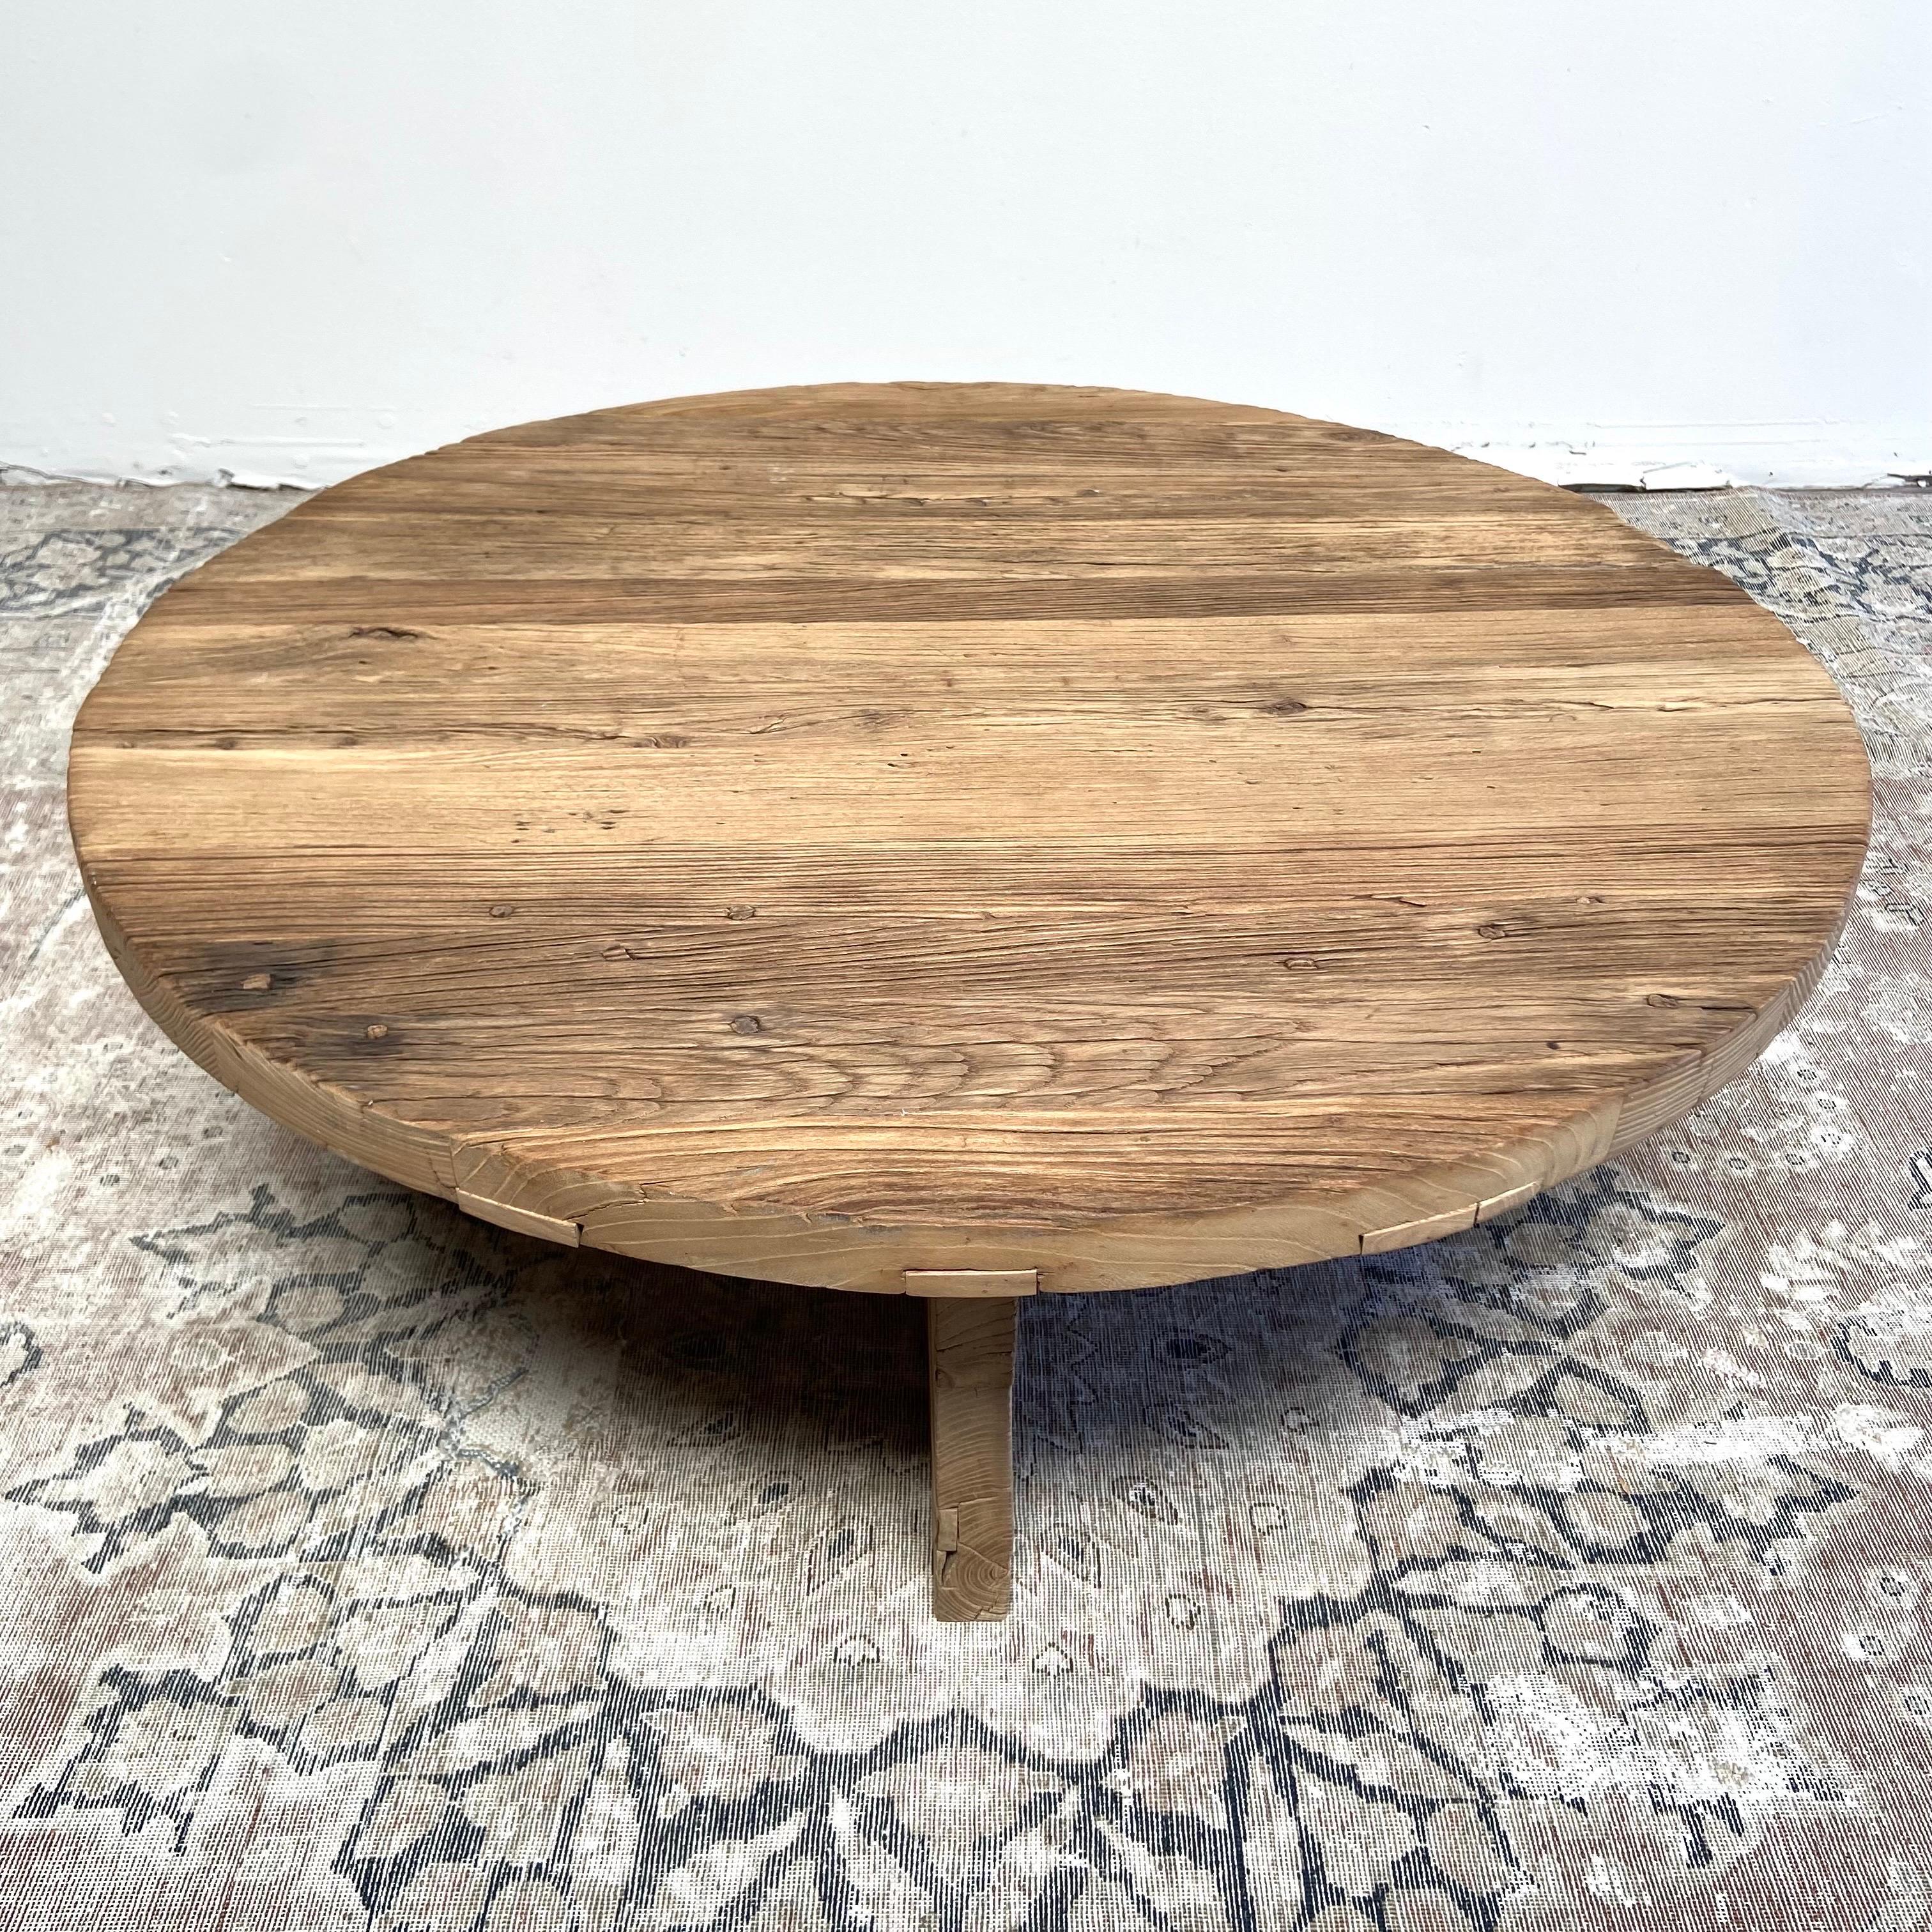 Custom made by bloom home inc, this elm wood X base coffee table is a perfect accent table. medium brown, solid elm wood. Elm X base coffee. Custom sizes available, please allow 16-20 weeks for a custom order. Reclaimed woods will have different